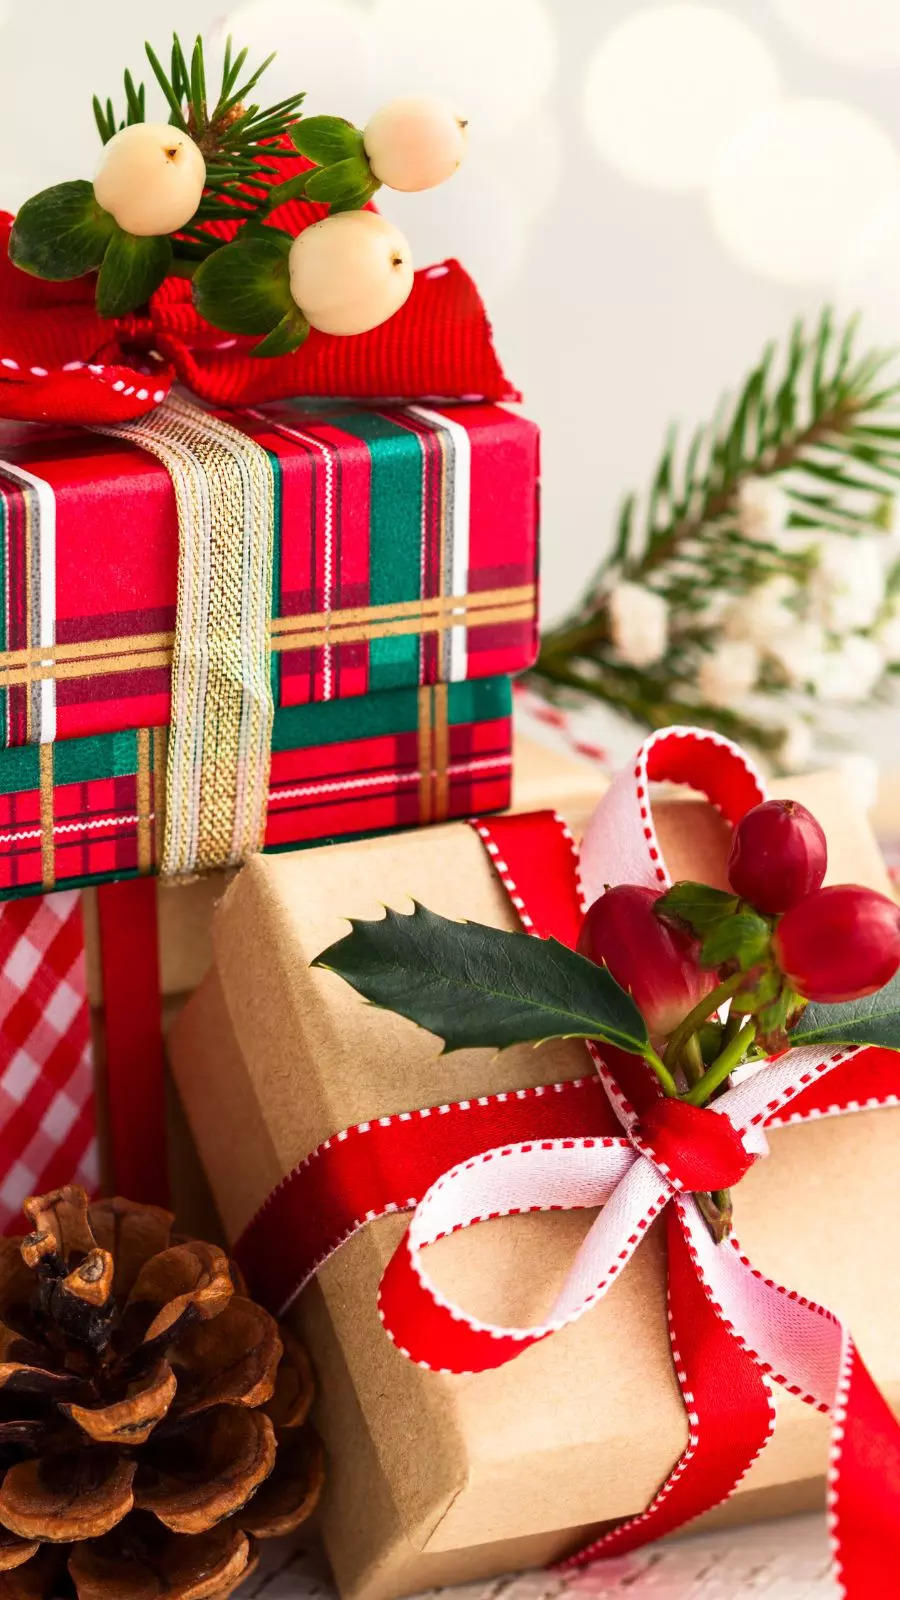 Thoughtful Family Gift Ideas - Get Something They ALL Love